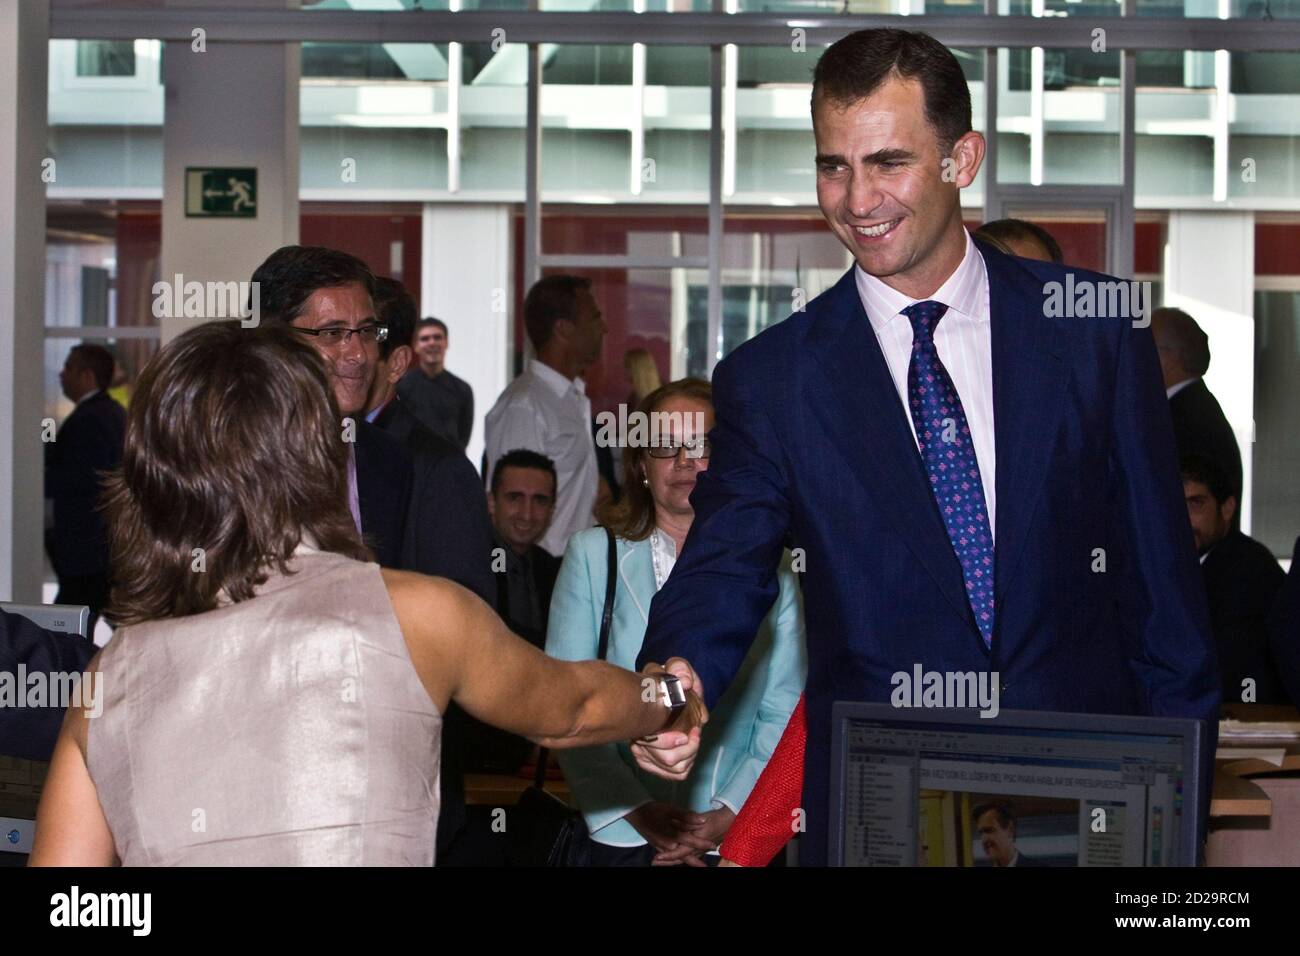 Spain's Crown Prince Felipe shakes hands with a journalist during the  inauguration of a new building for the "Canarias 7" newspaper in Las Palmas  de Gran Canaria, Canary islands October 13, 2008.